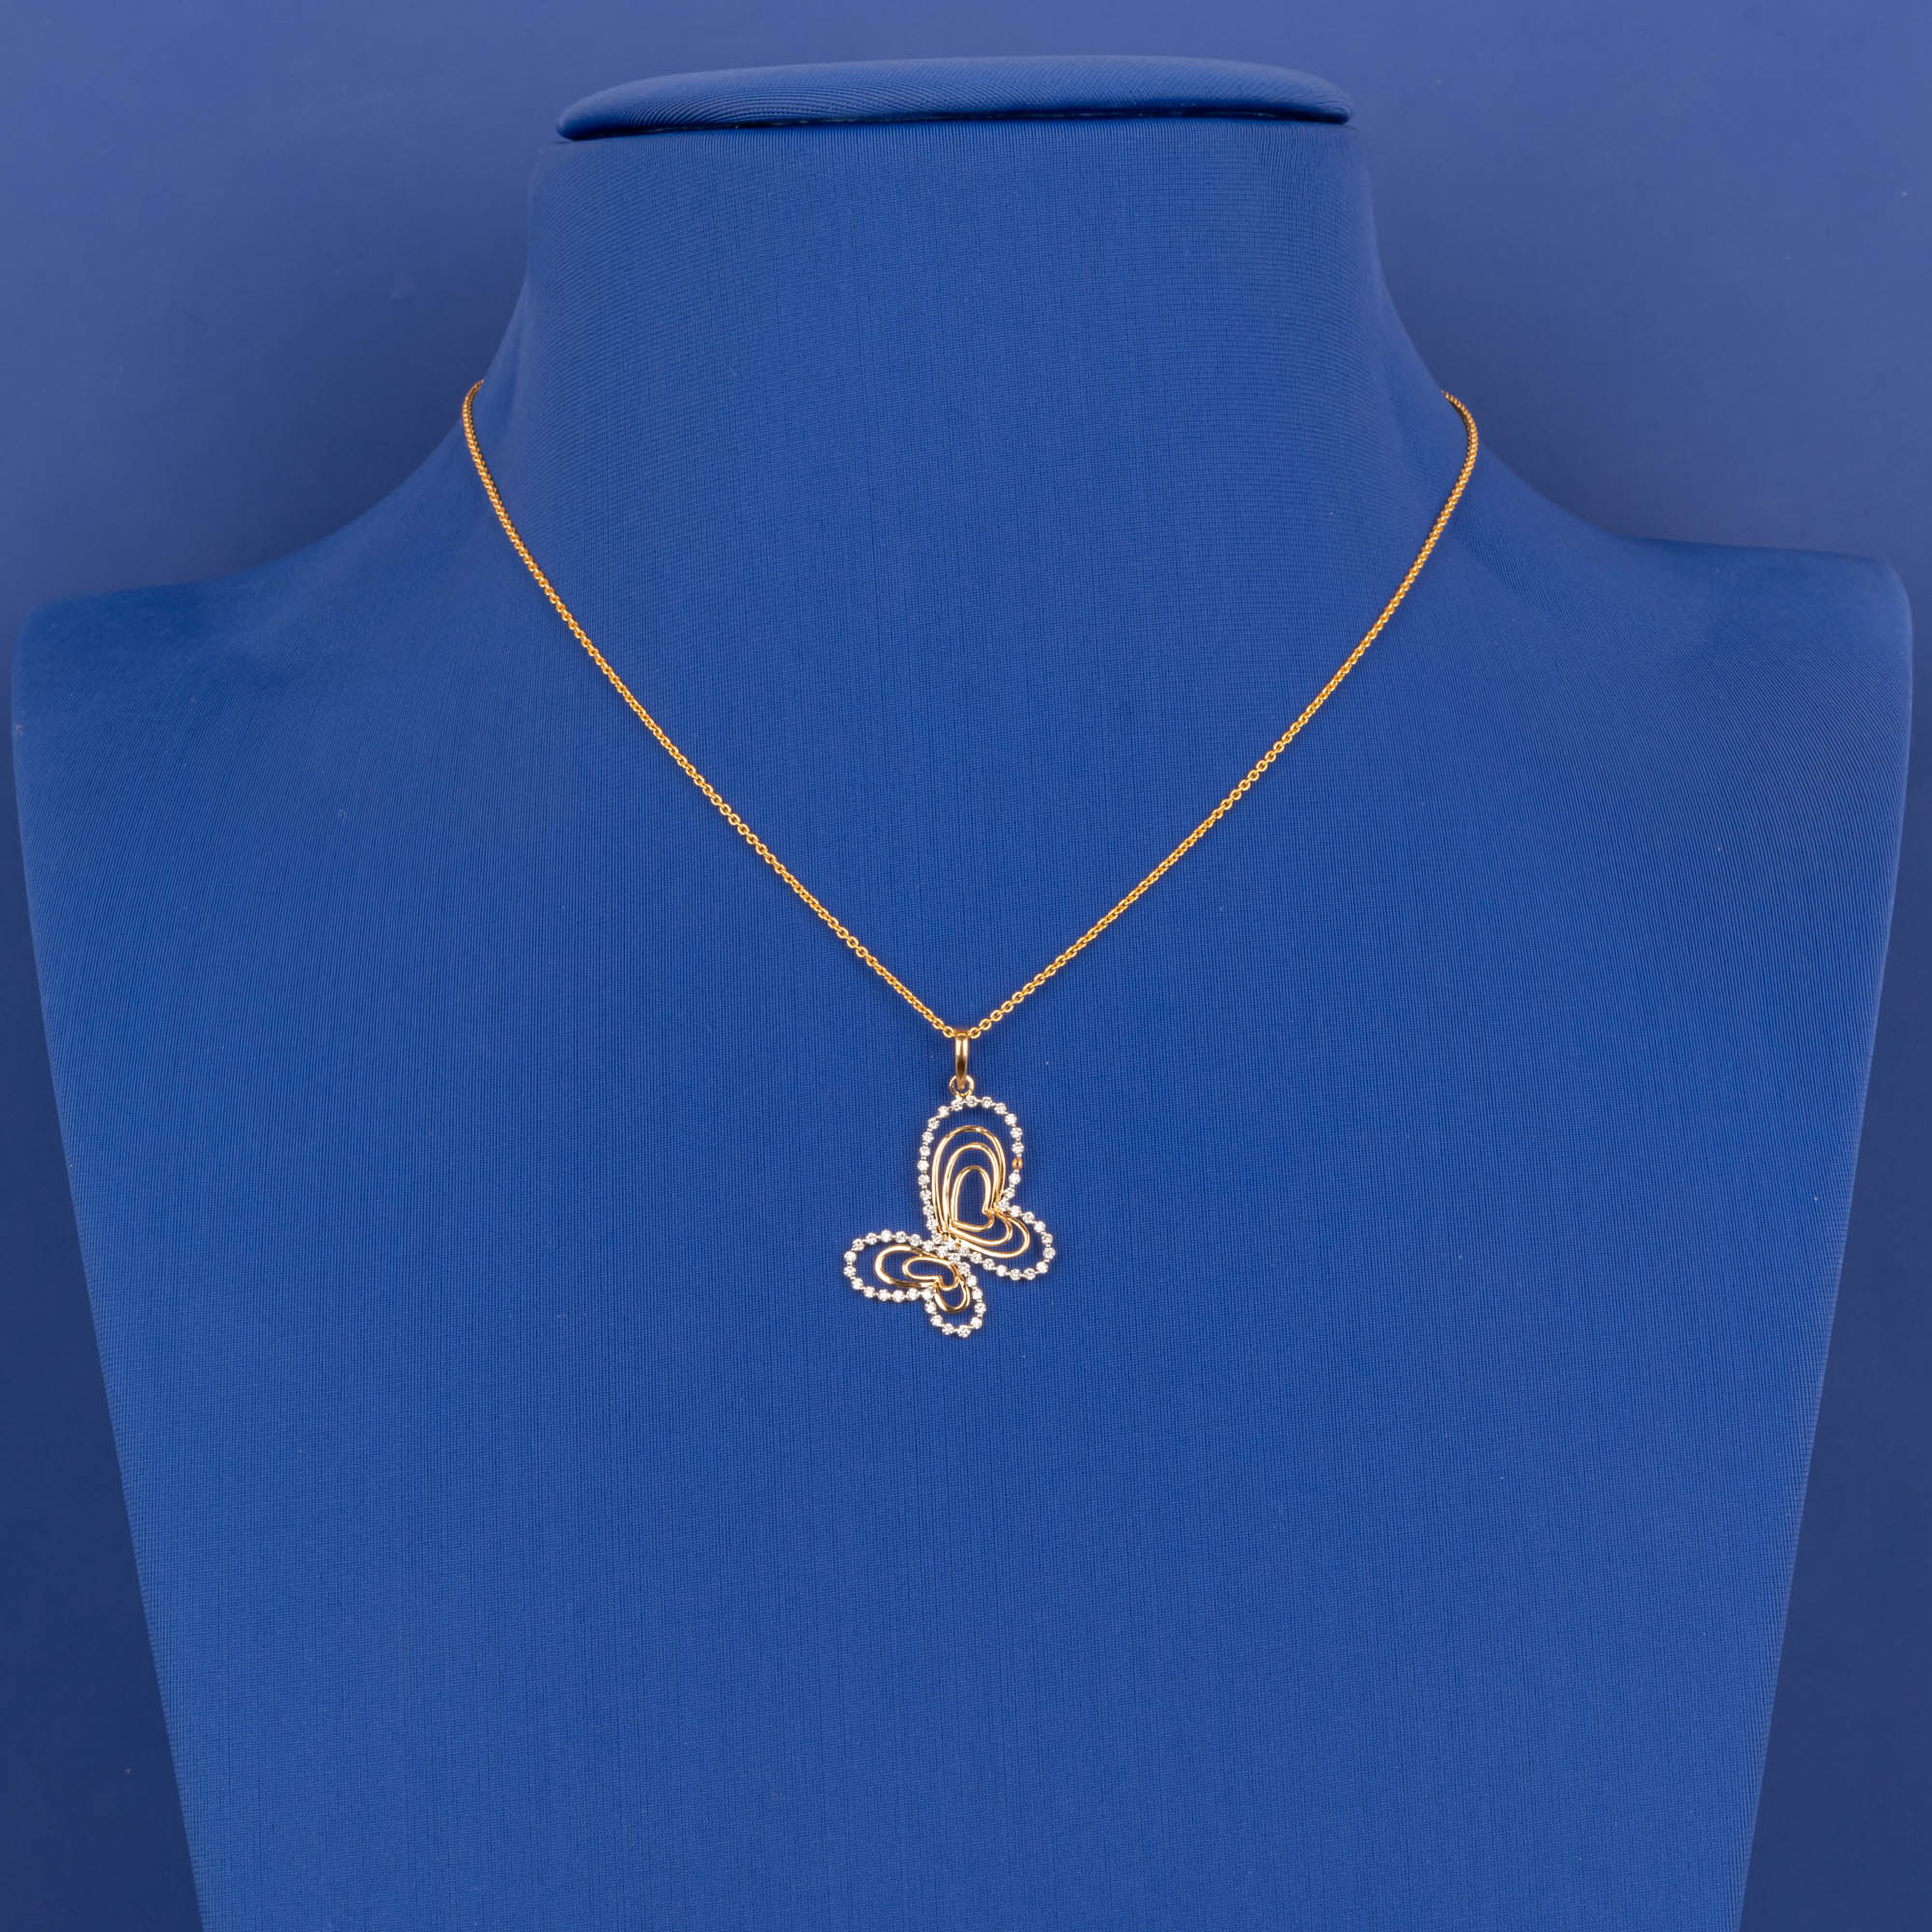 Whimsical Flutter: Playful 18K Yellow Gold Diamond 'Butterfly' Pendant (chain not included)